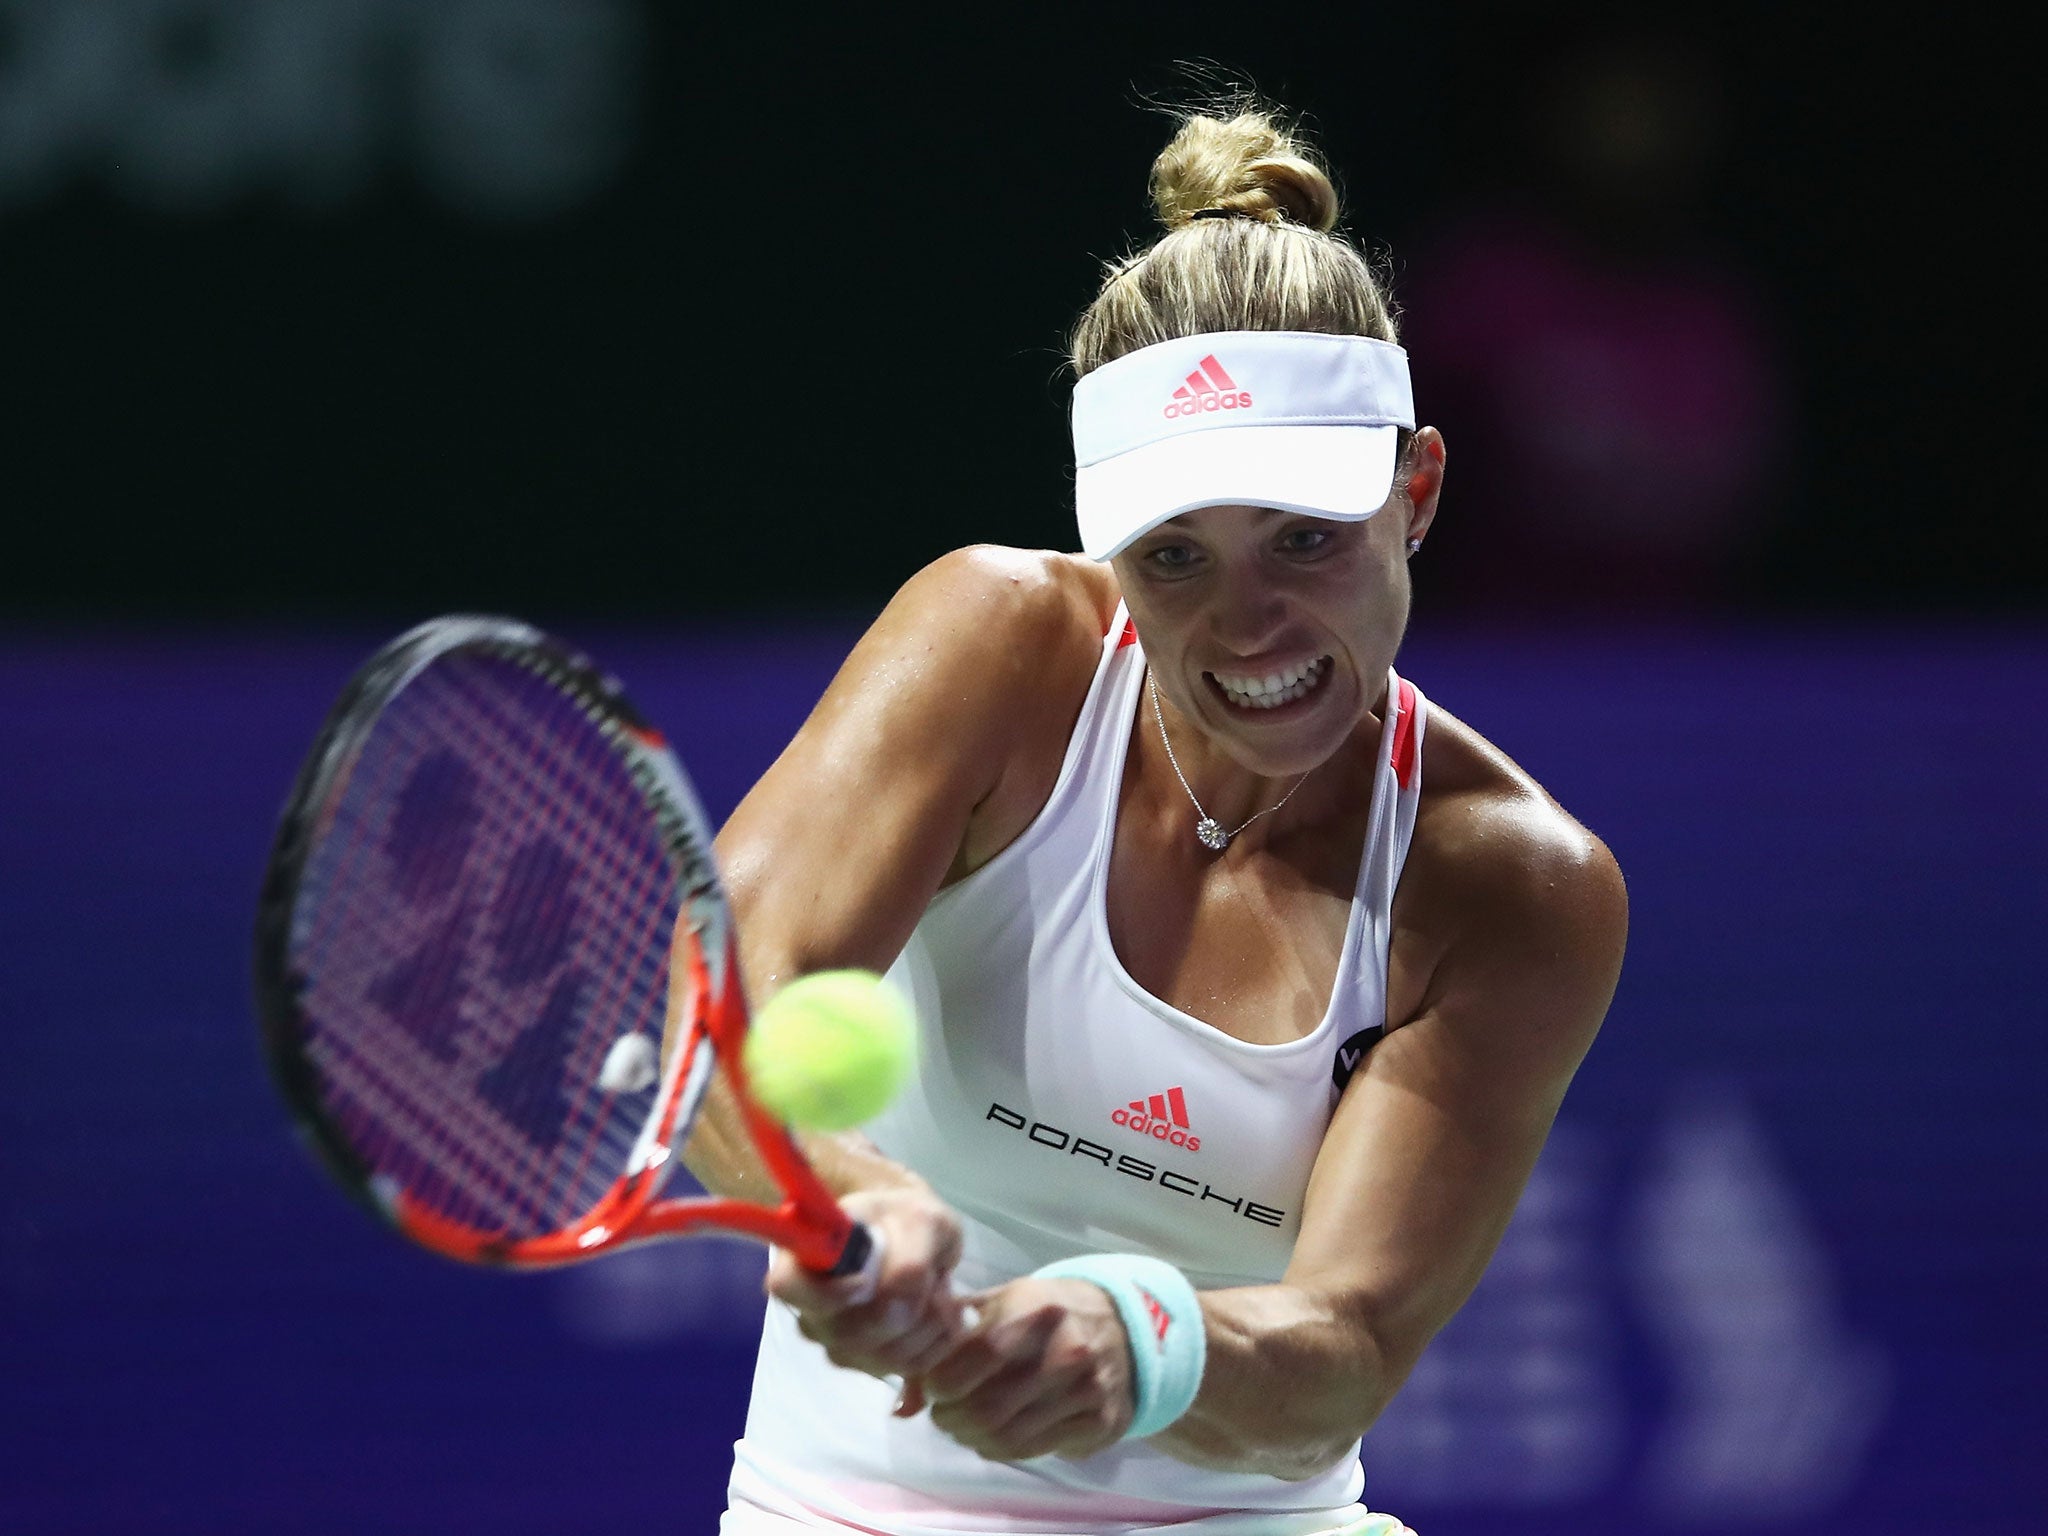 Kerber in action at the WTA Finals in Singapore